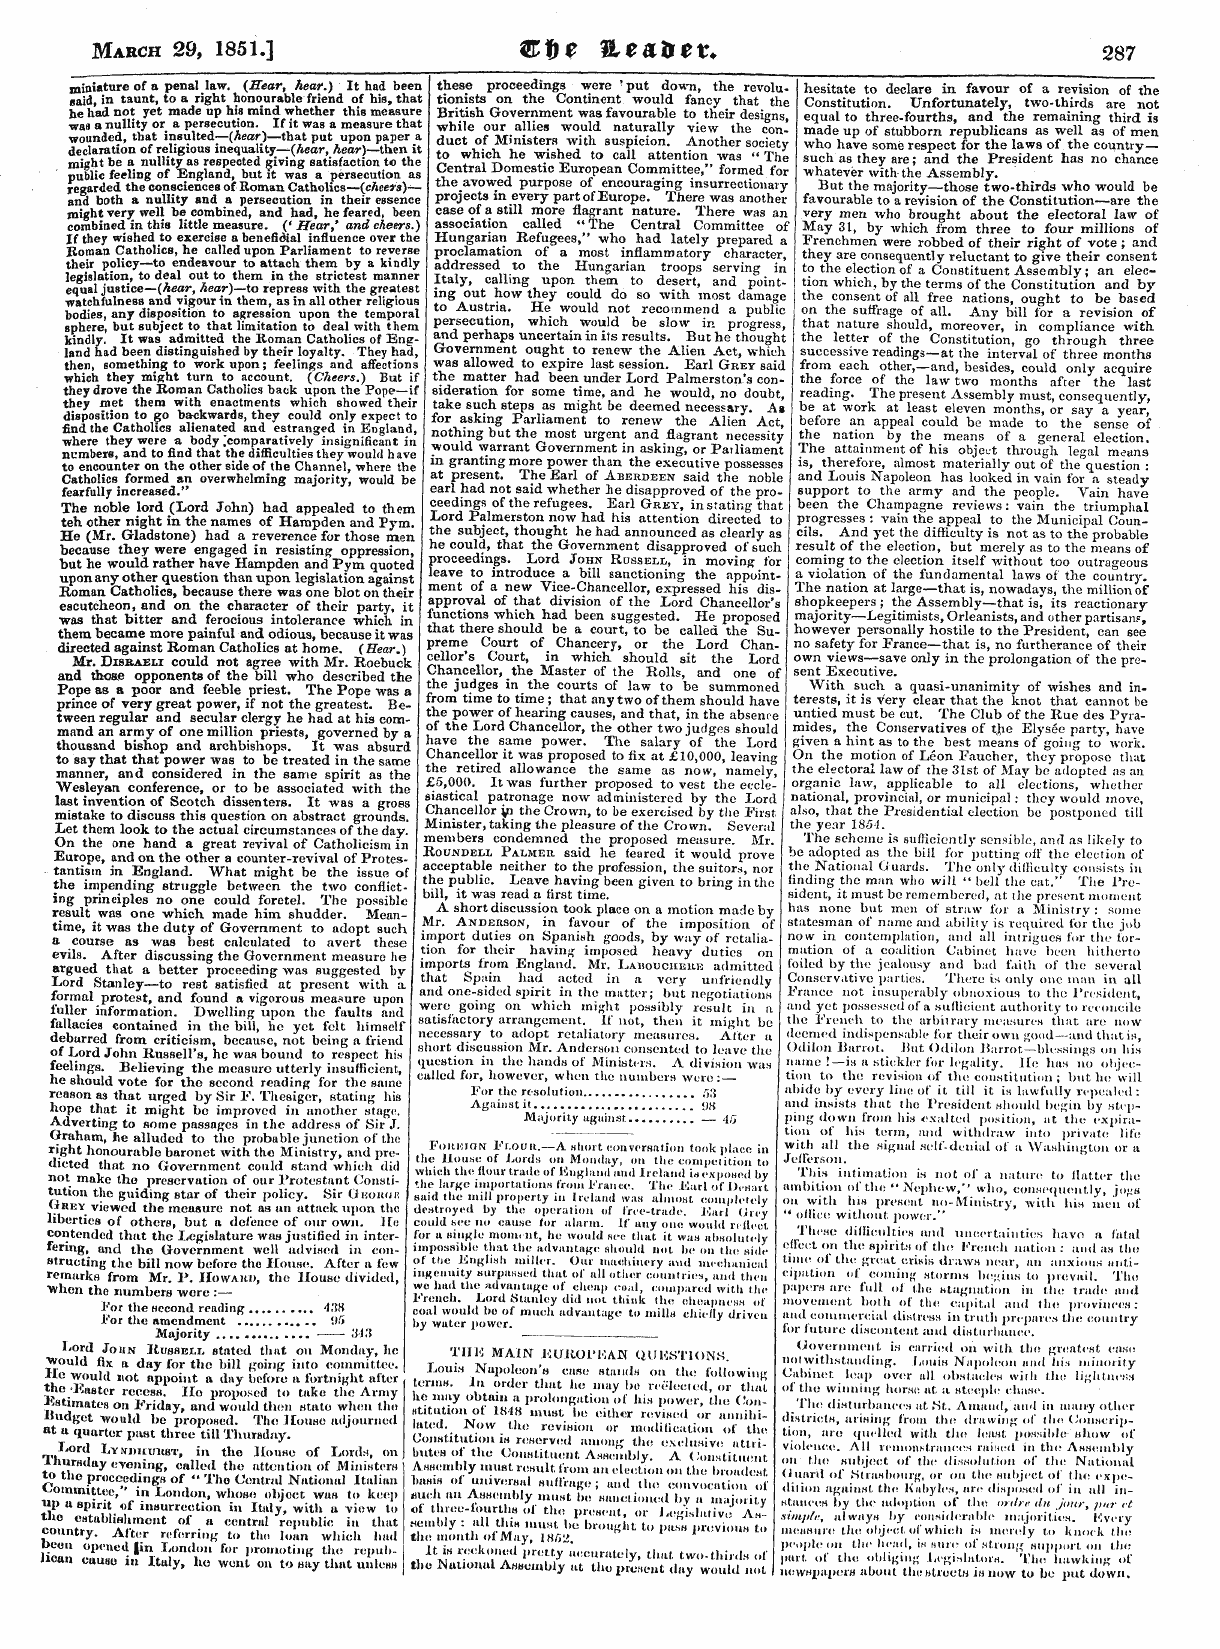 Leader (1850-1860): jS F Y, Country edition - March 29, 1851.] ®T)C Hcaftcw 287